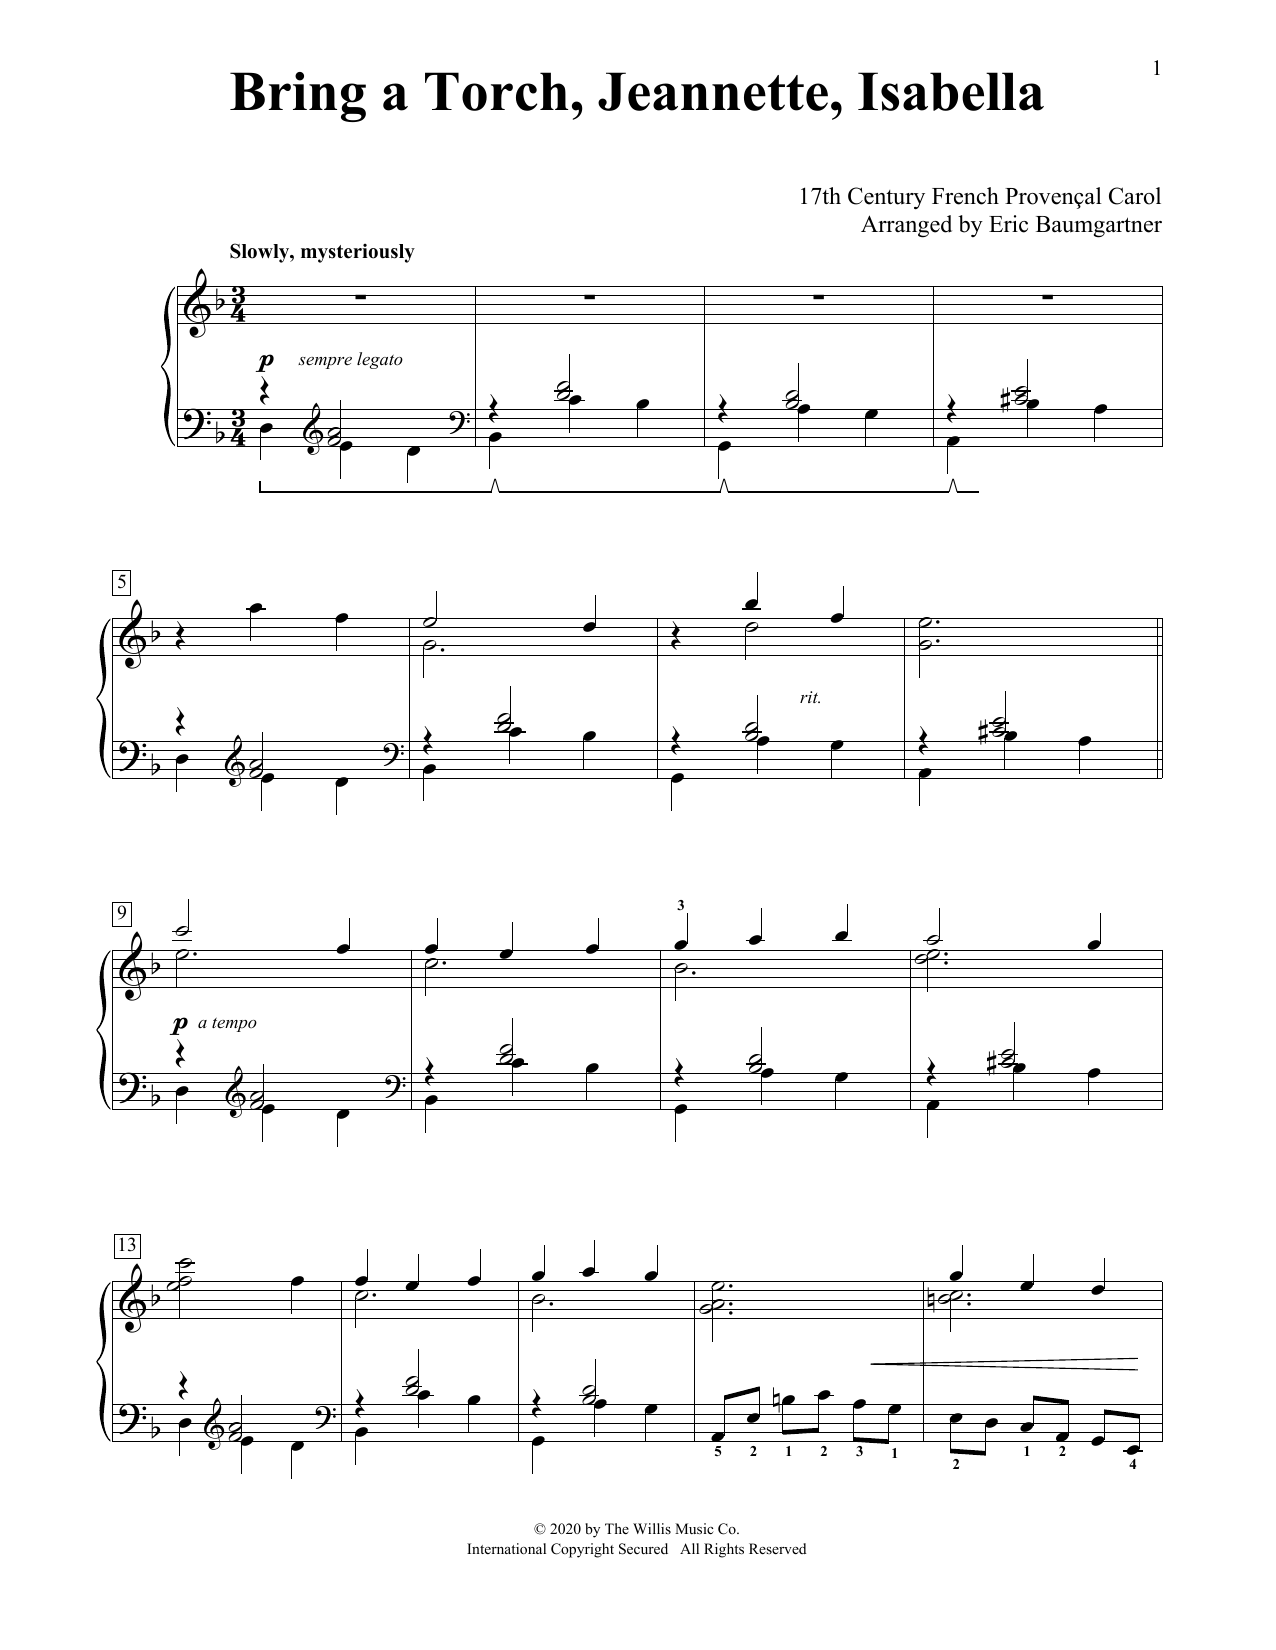 17th Century French Carol Bring A Torch, Jeannette, Isabella [Jazz version] (arr. Eric Baumgartner) sheet music notes and chords. Download Printable PDF.